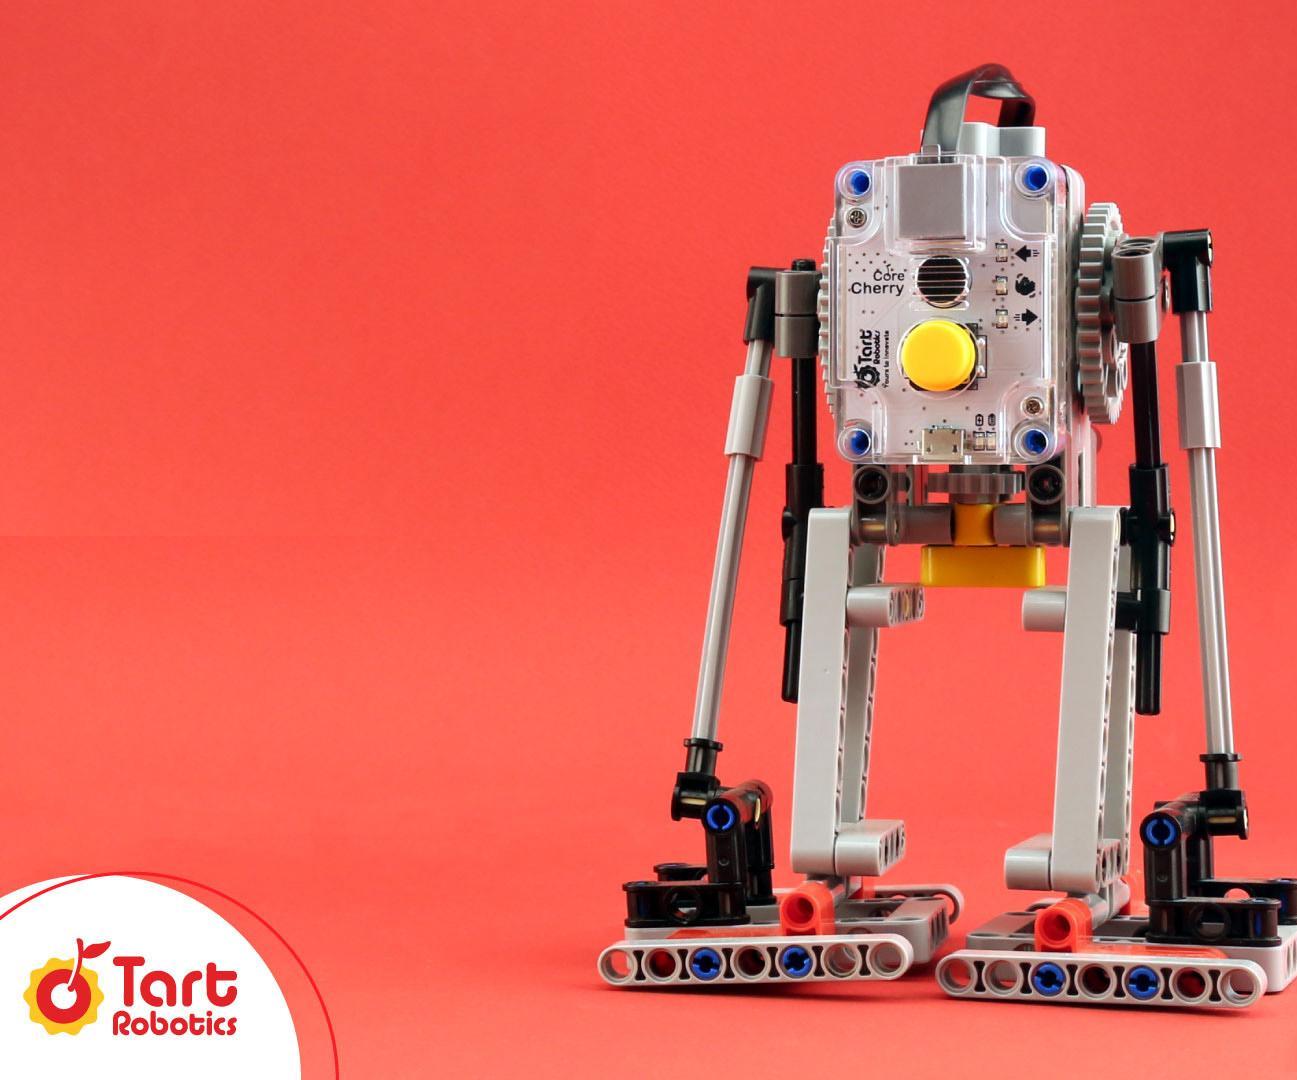 A Sound-activated DIY Biped Robot With a Lego-compatible Parts